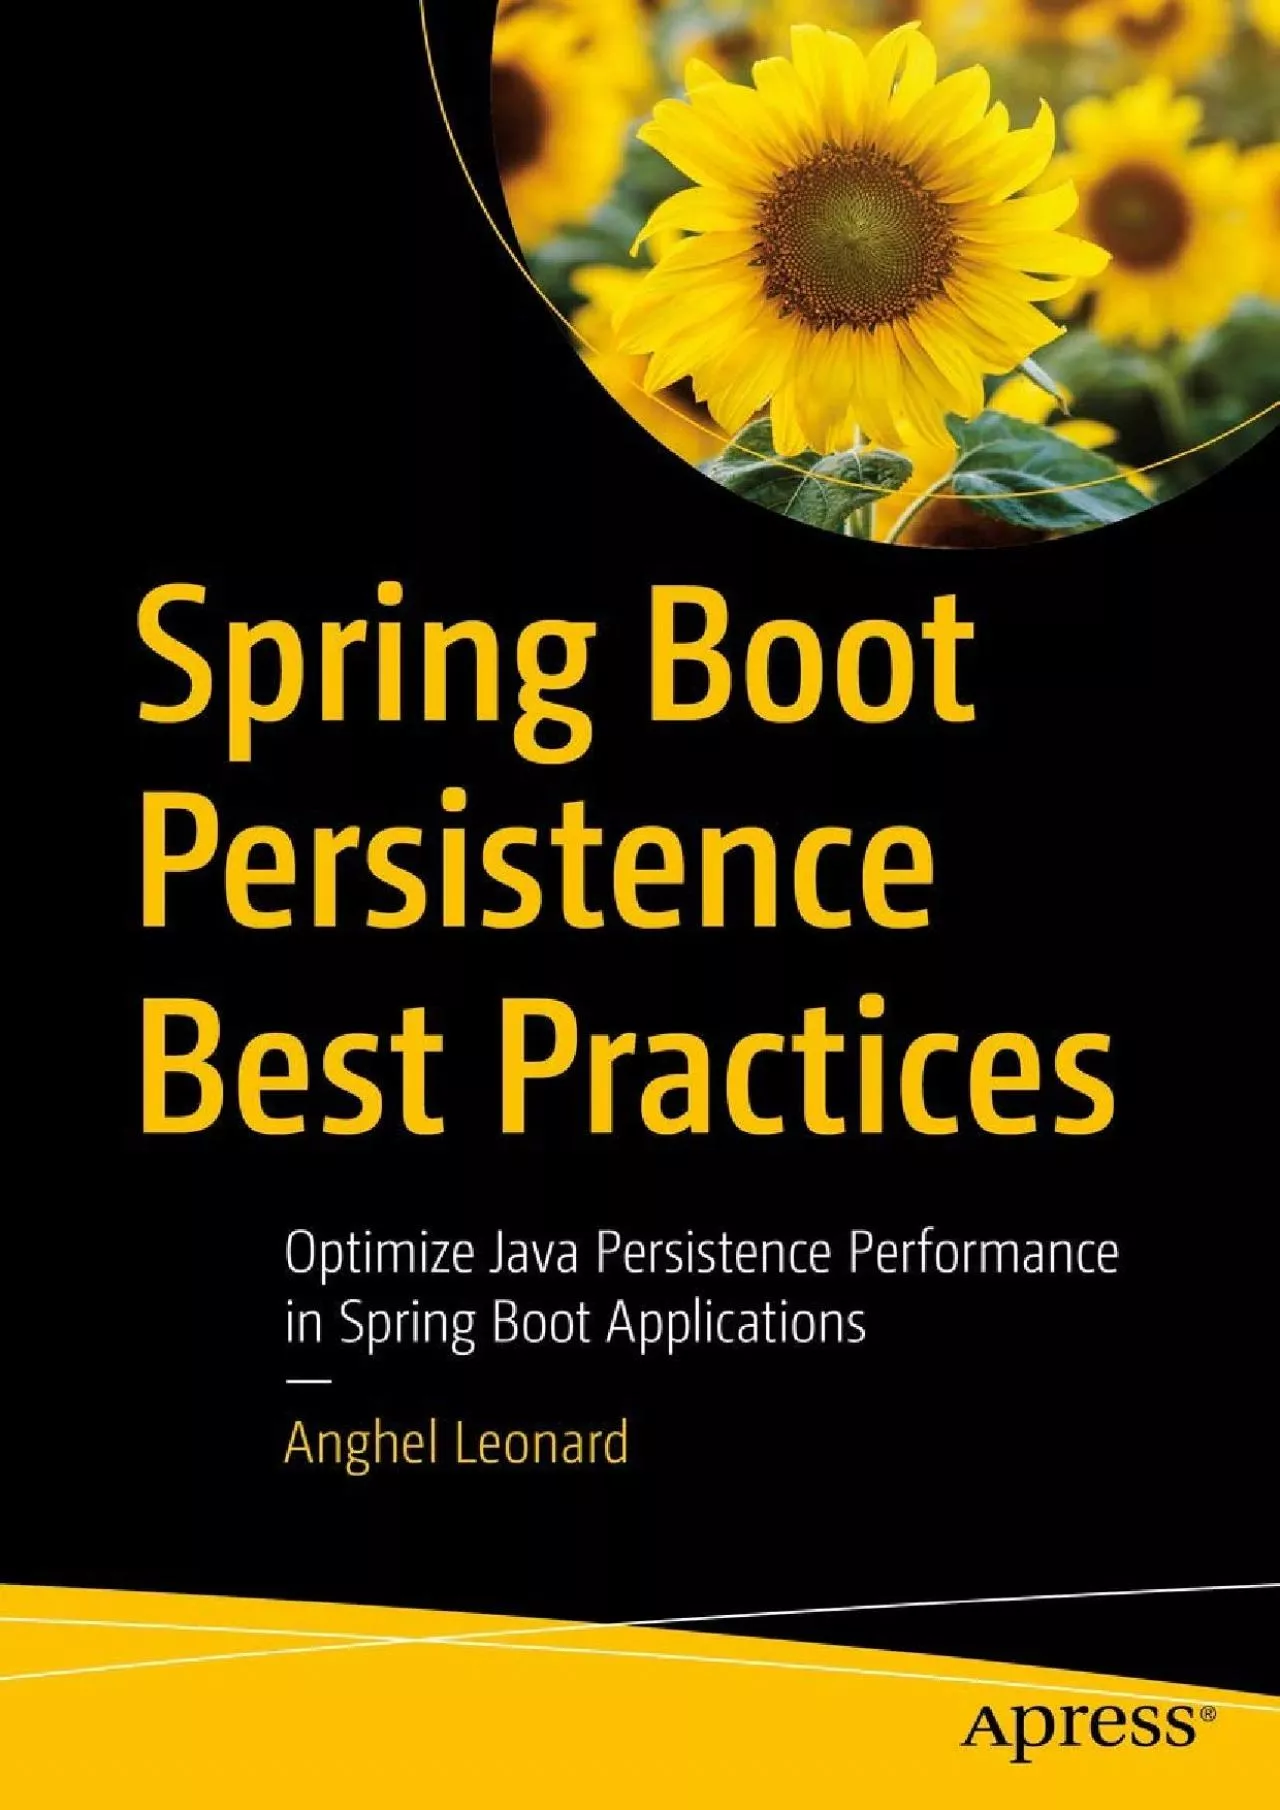 [READ]-Spring Boot Persistence Best Practices: Optimize Java Persistence Performance in